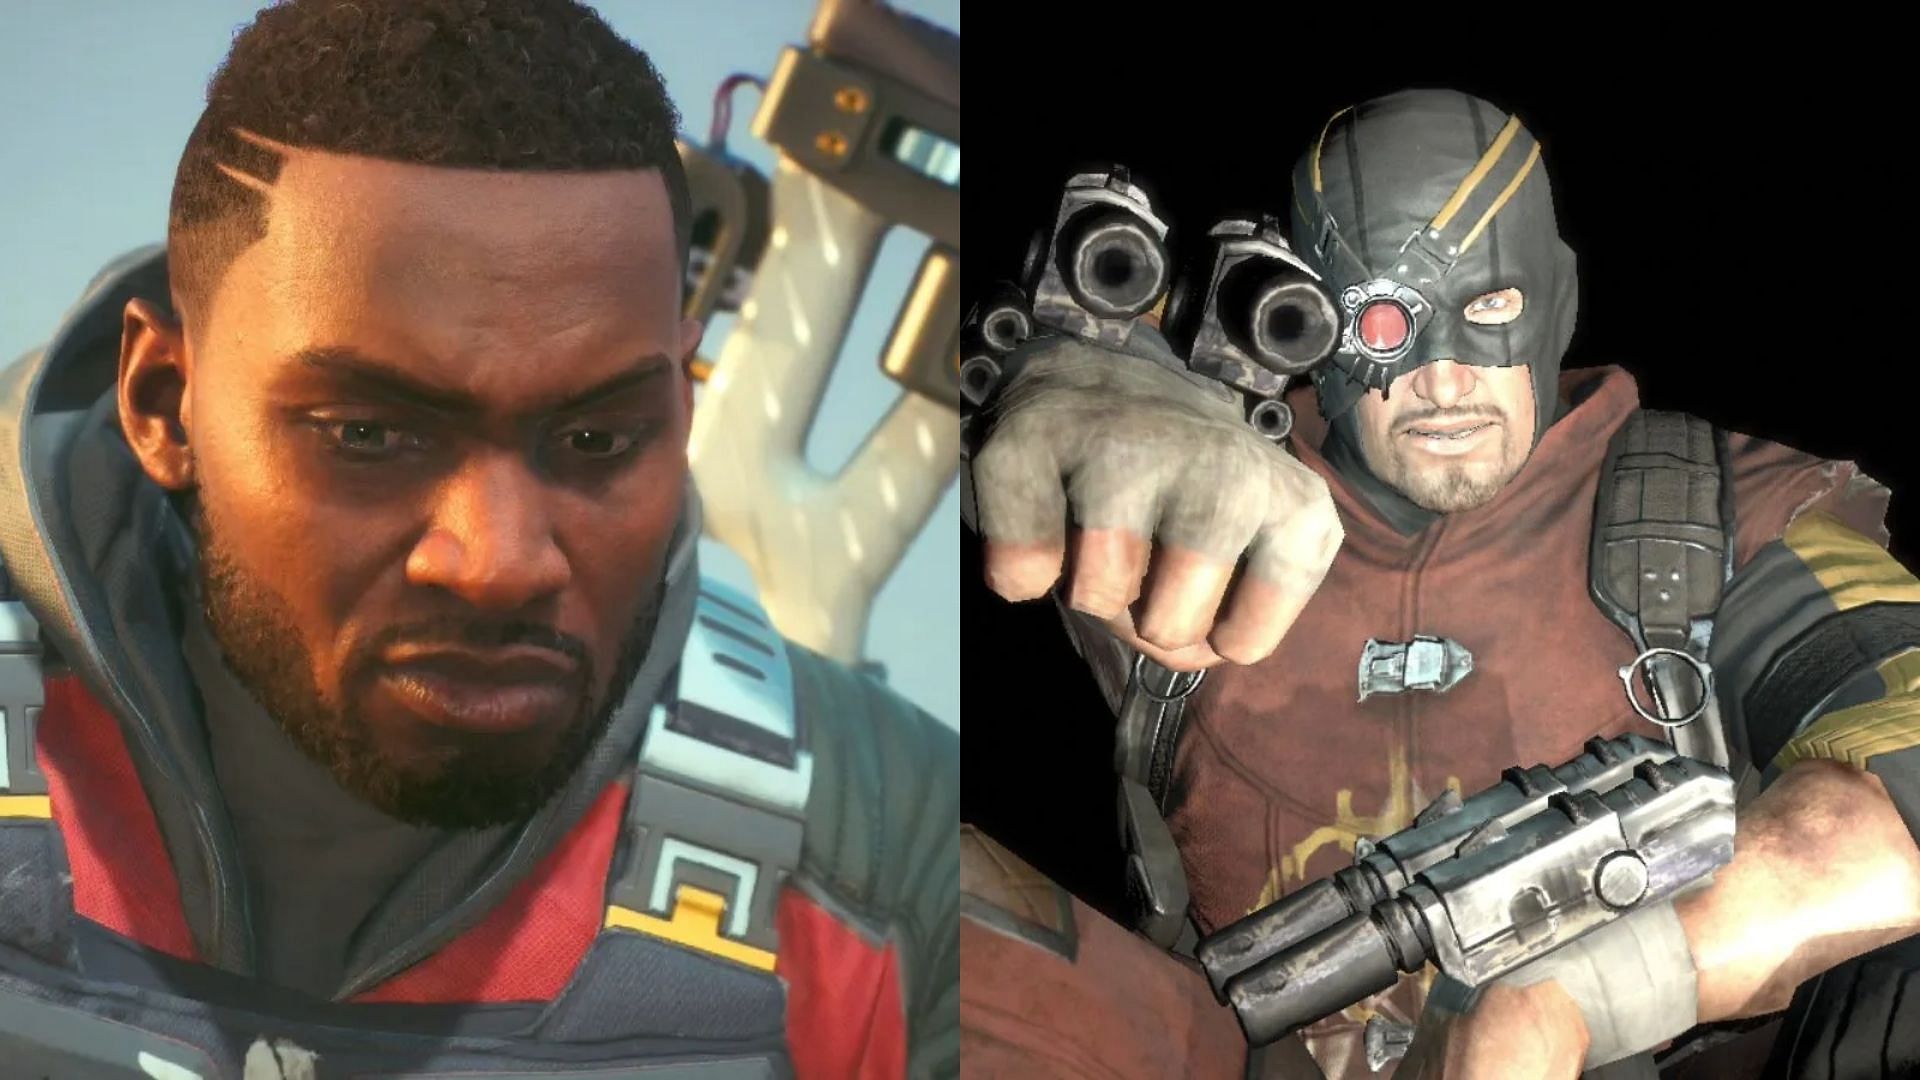 Deadshot being race-swapped leaves a lot of questions unanswered in Suicide Squad Kill the Justice League (Image via Rocksteady Studios, Warner Bros. Games)